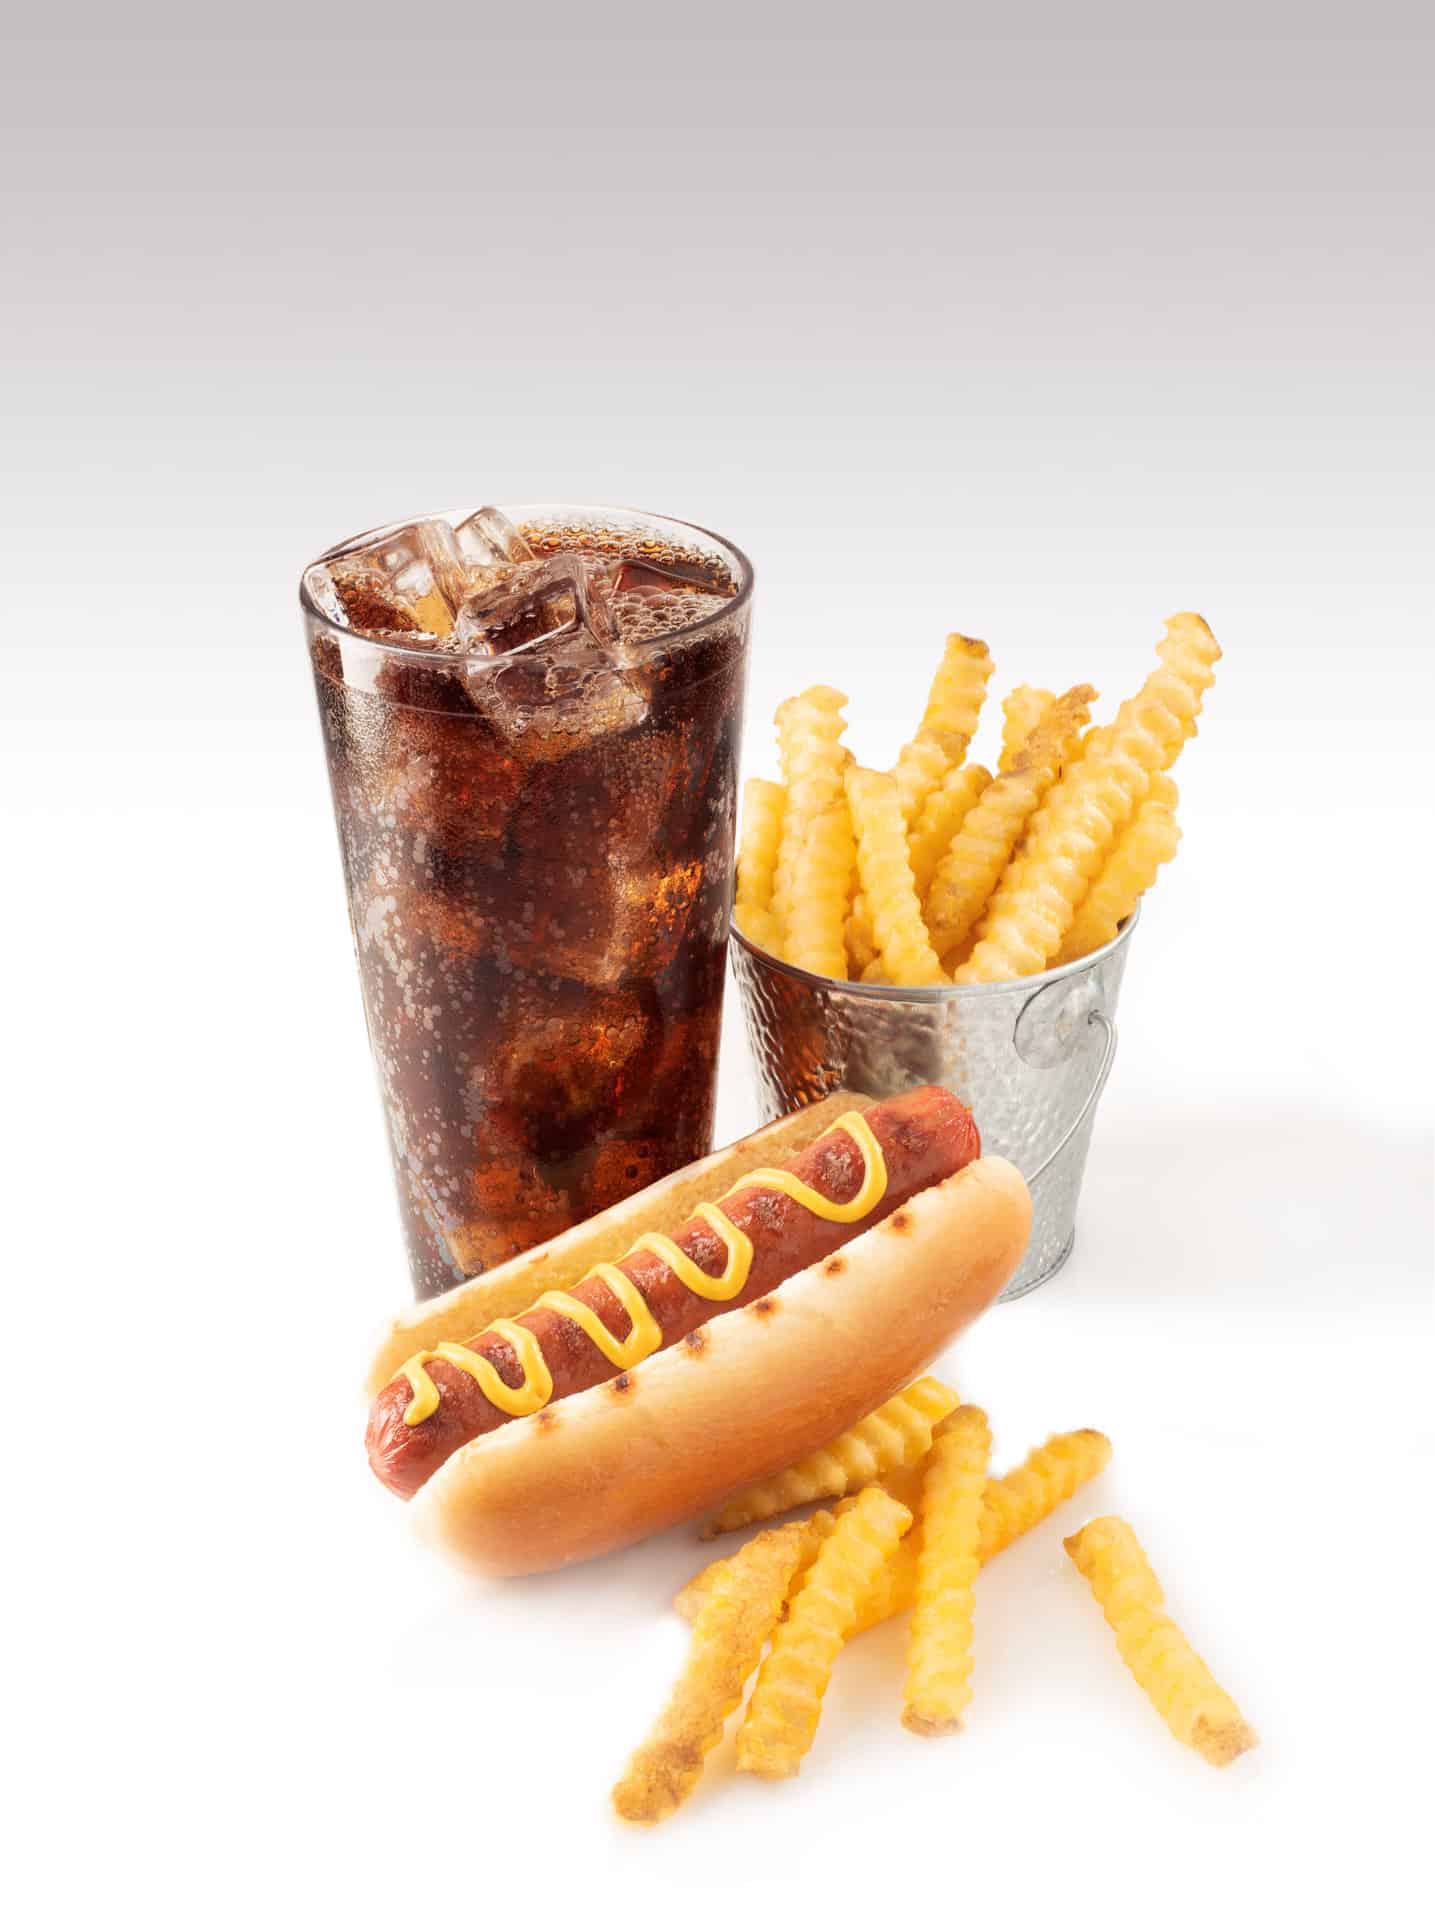 Hot dog with drink and fries